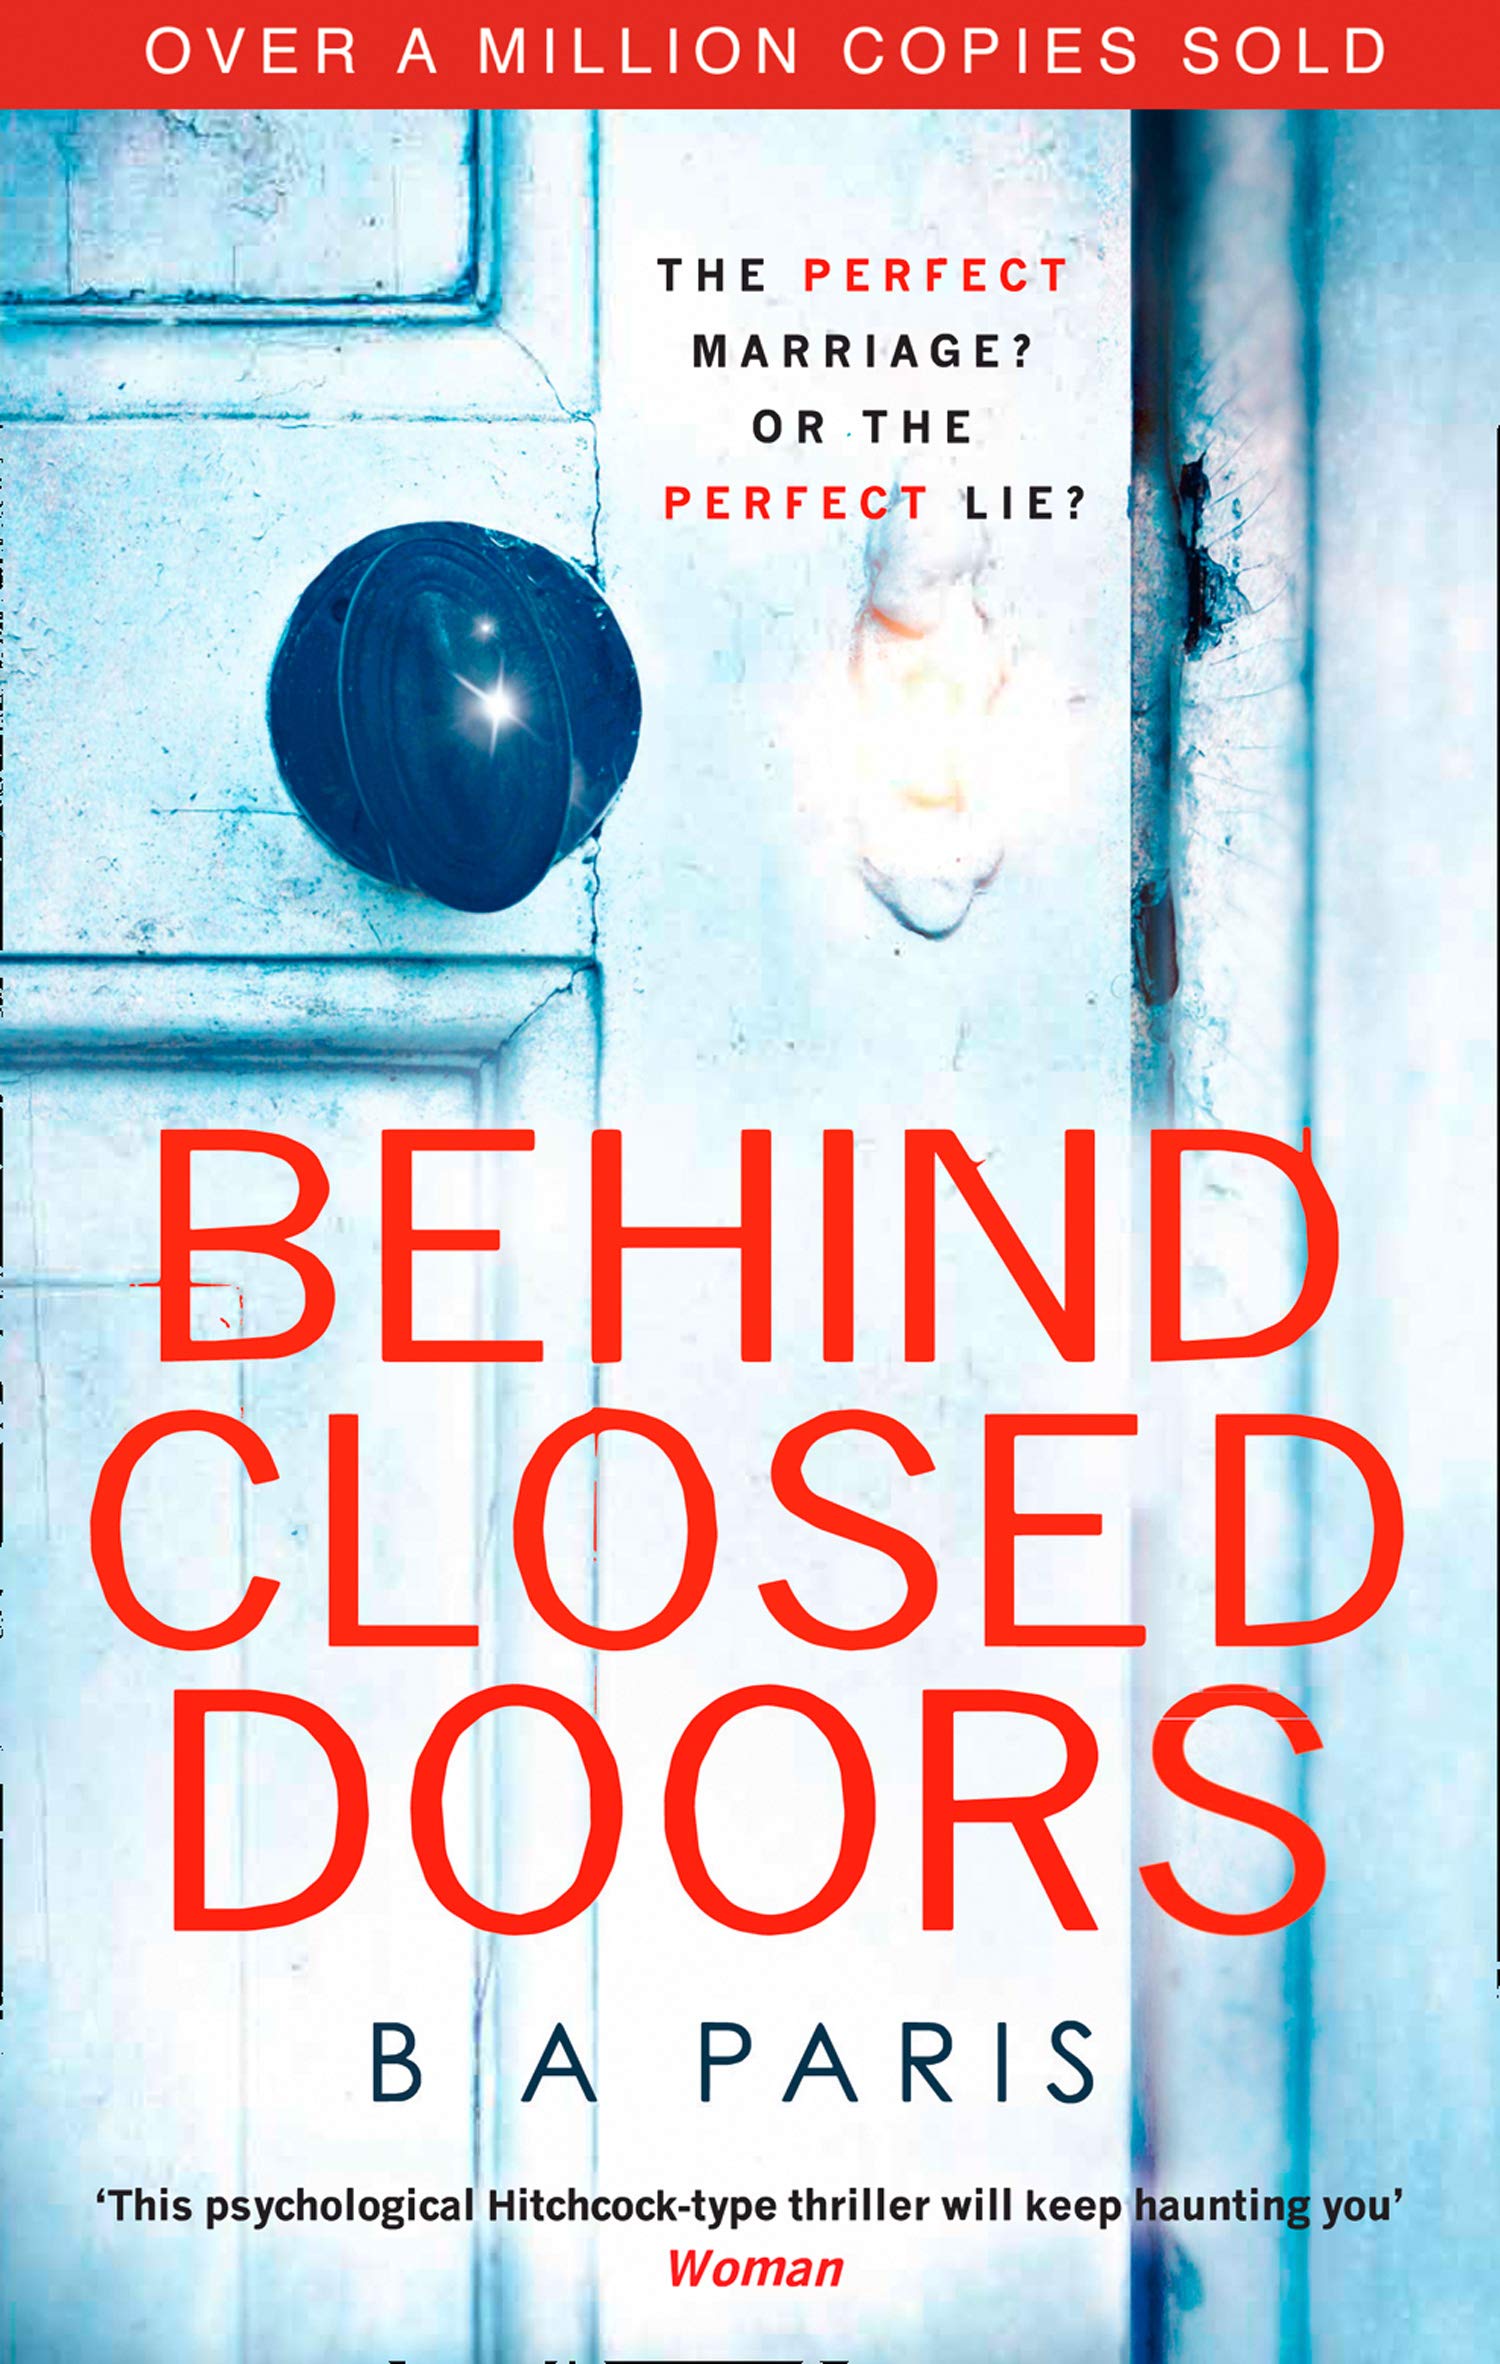 Cover of Behind Closed Doors by B.A. Paris